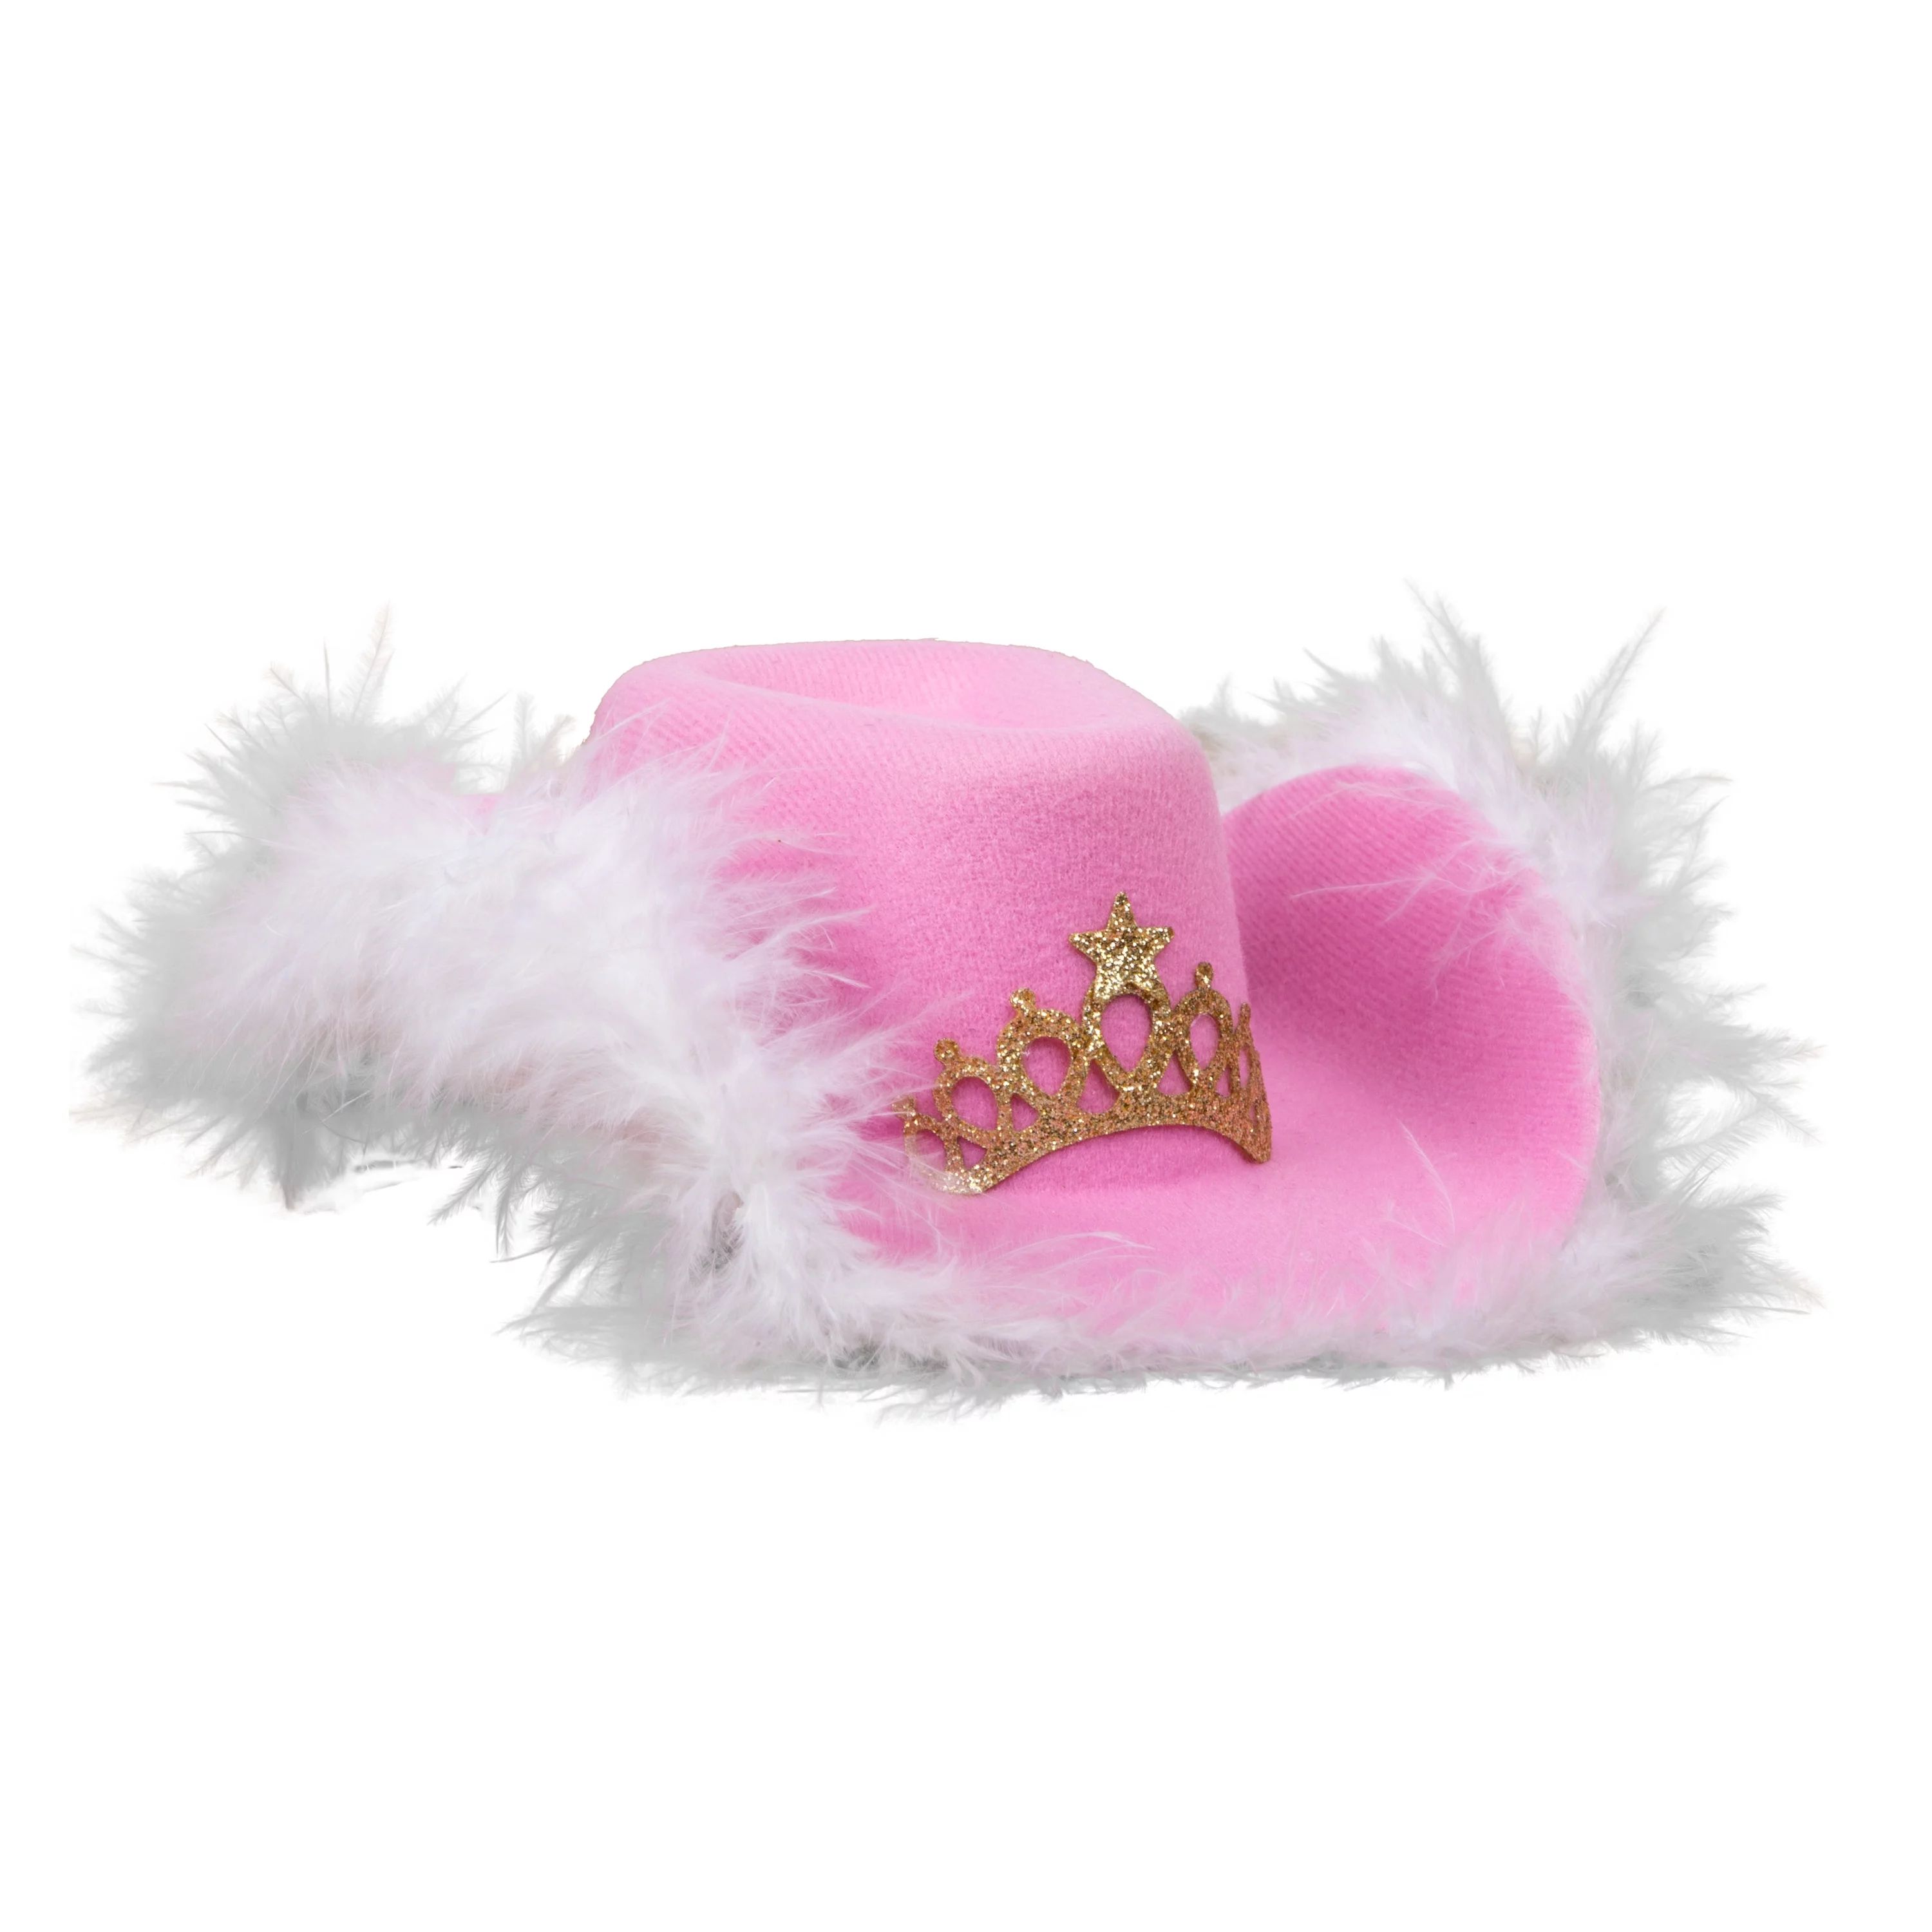 Doggy Parton Dog Clothes, Cowgirl Dog Hat with Tiara, Pink, XS/S | Walmart (US)